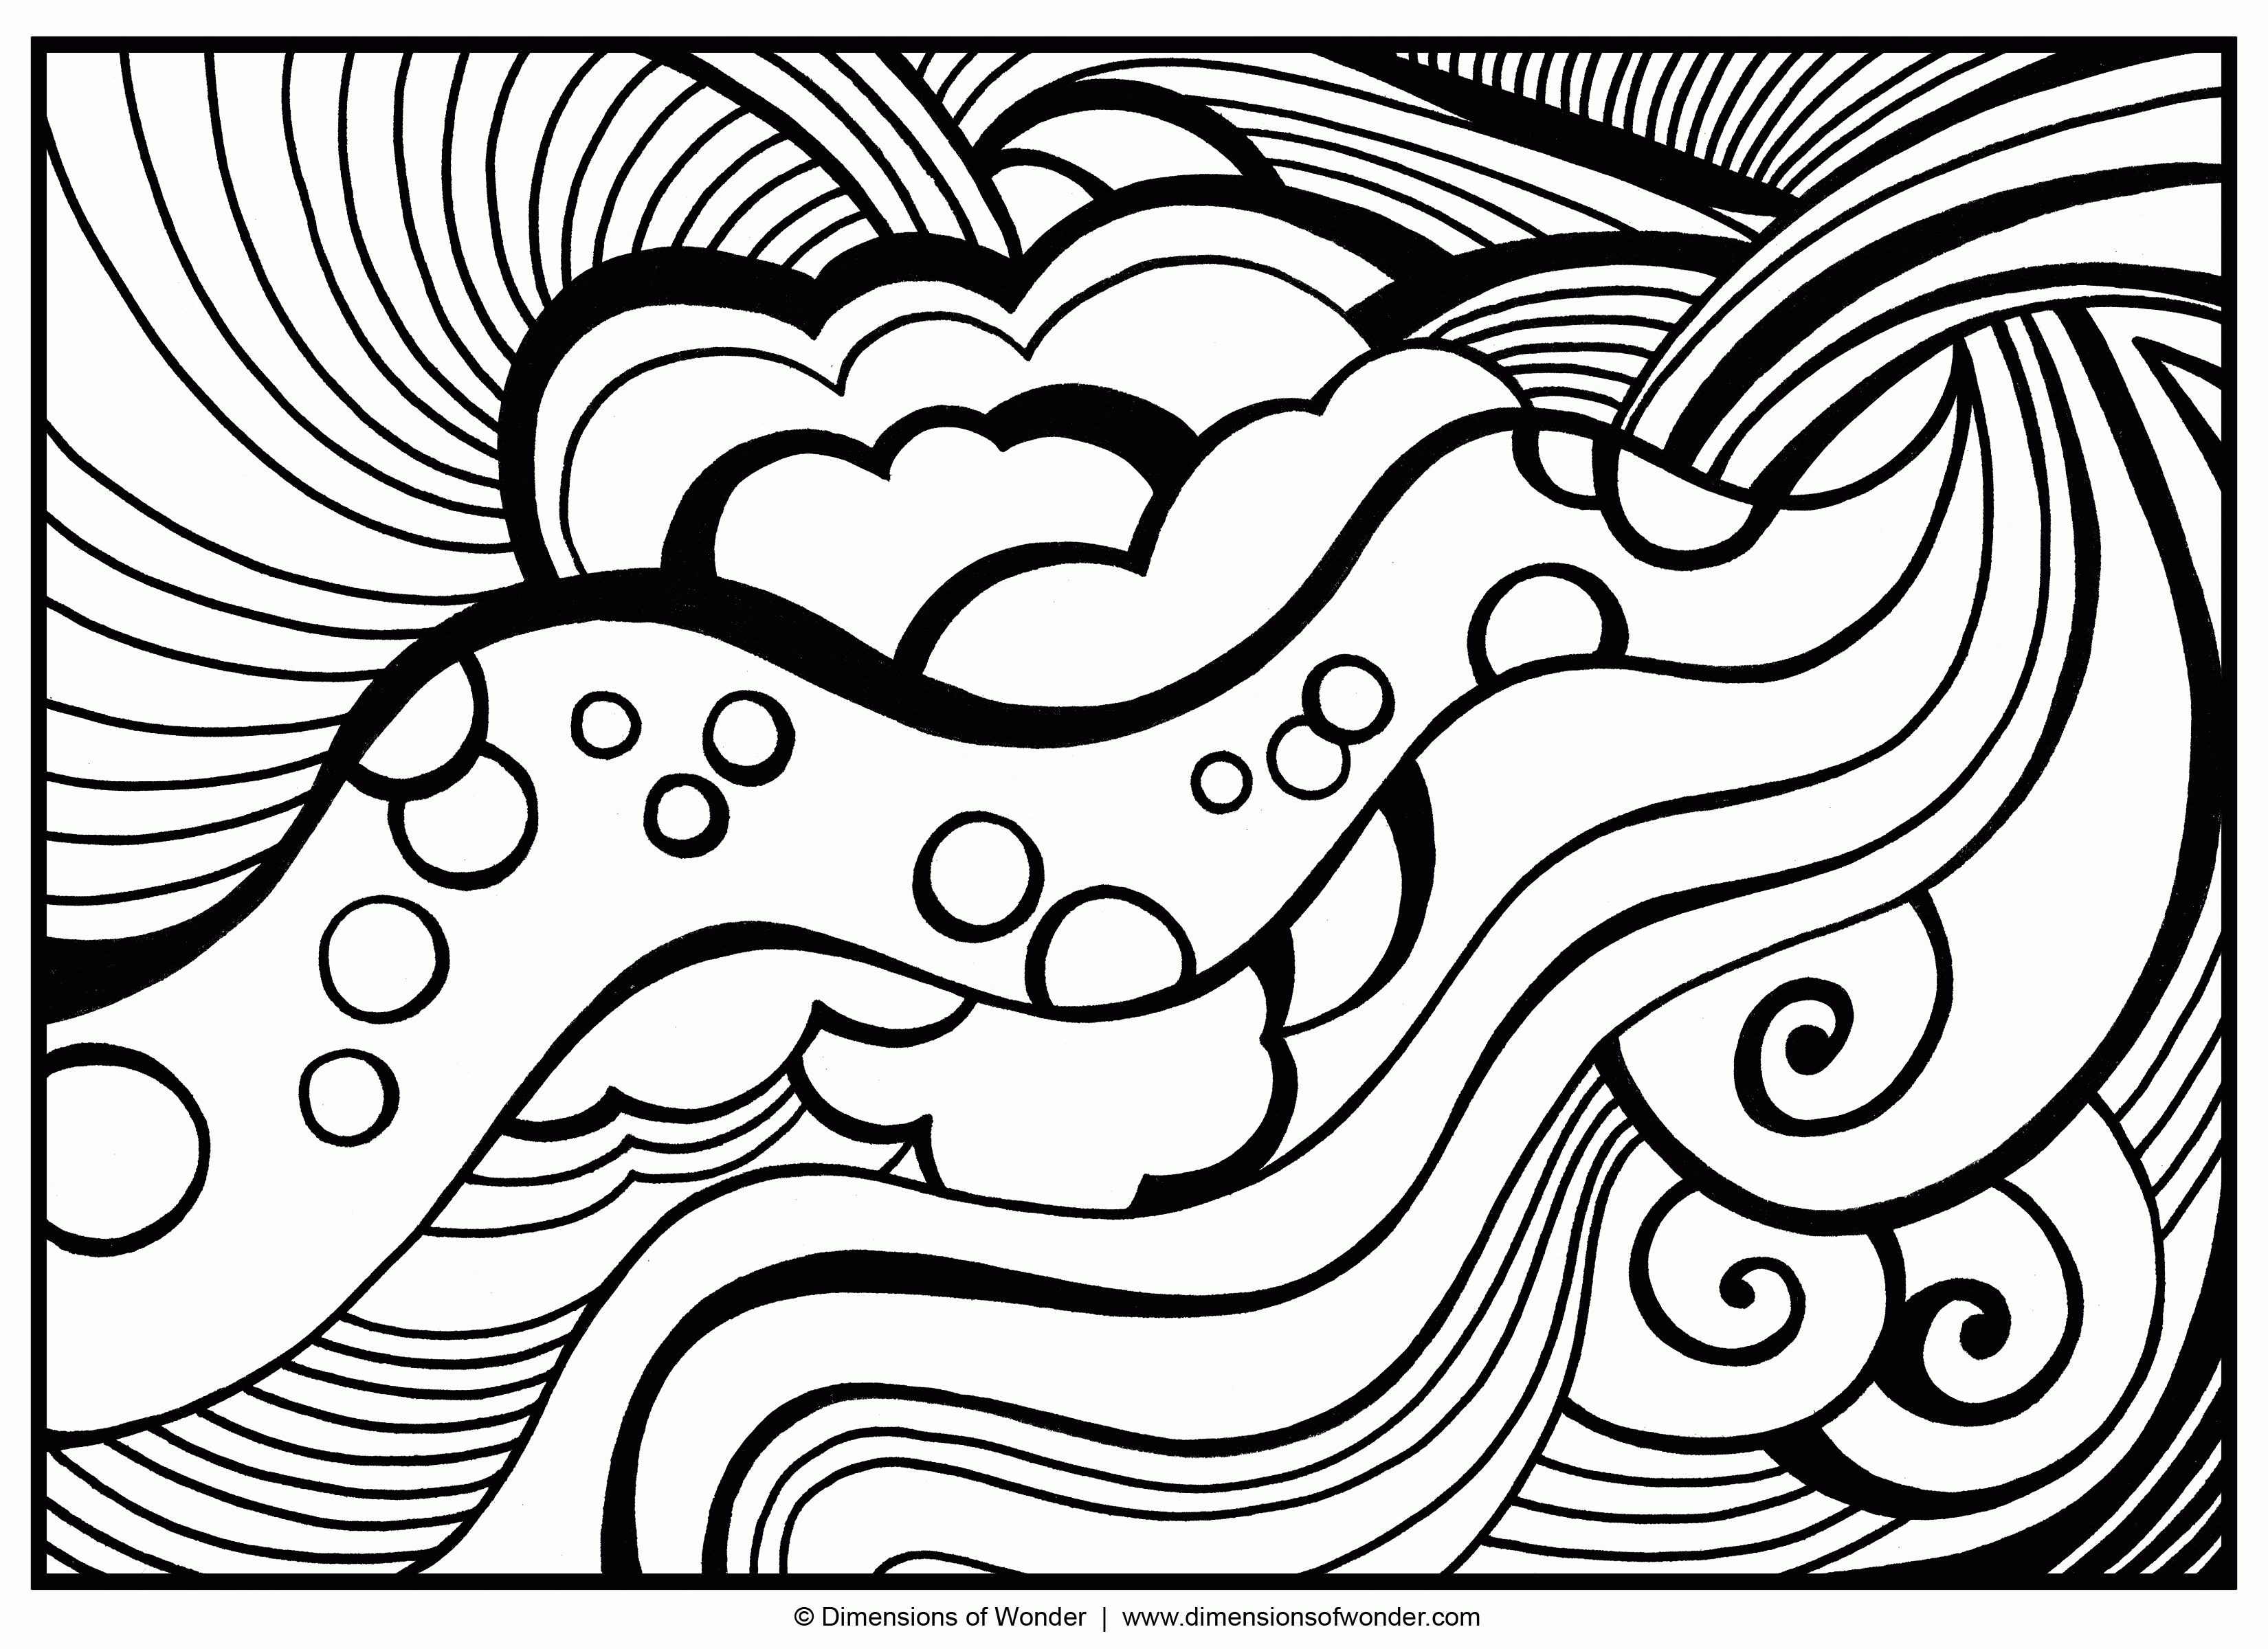 Related Abstract Coloring Pages item-11382, Abstract Coloring ...